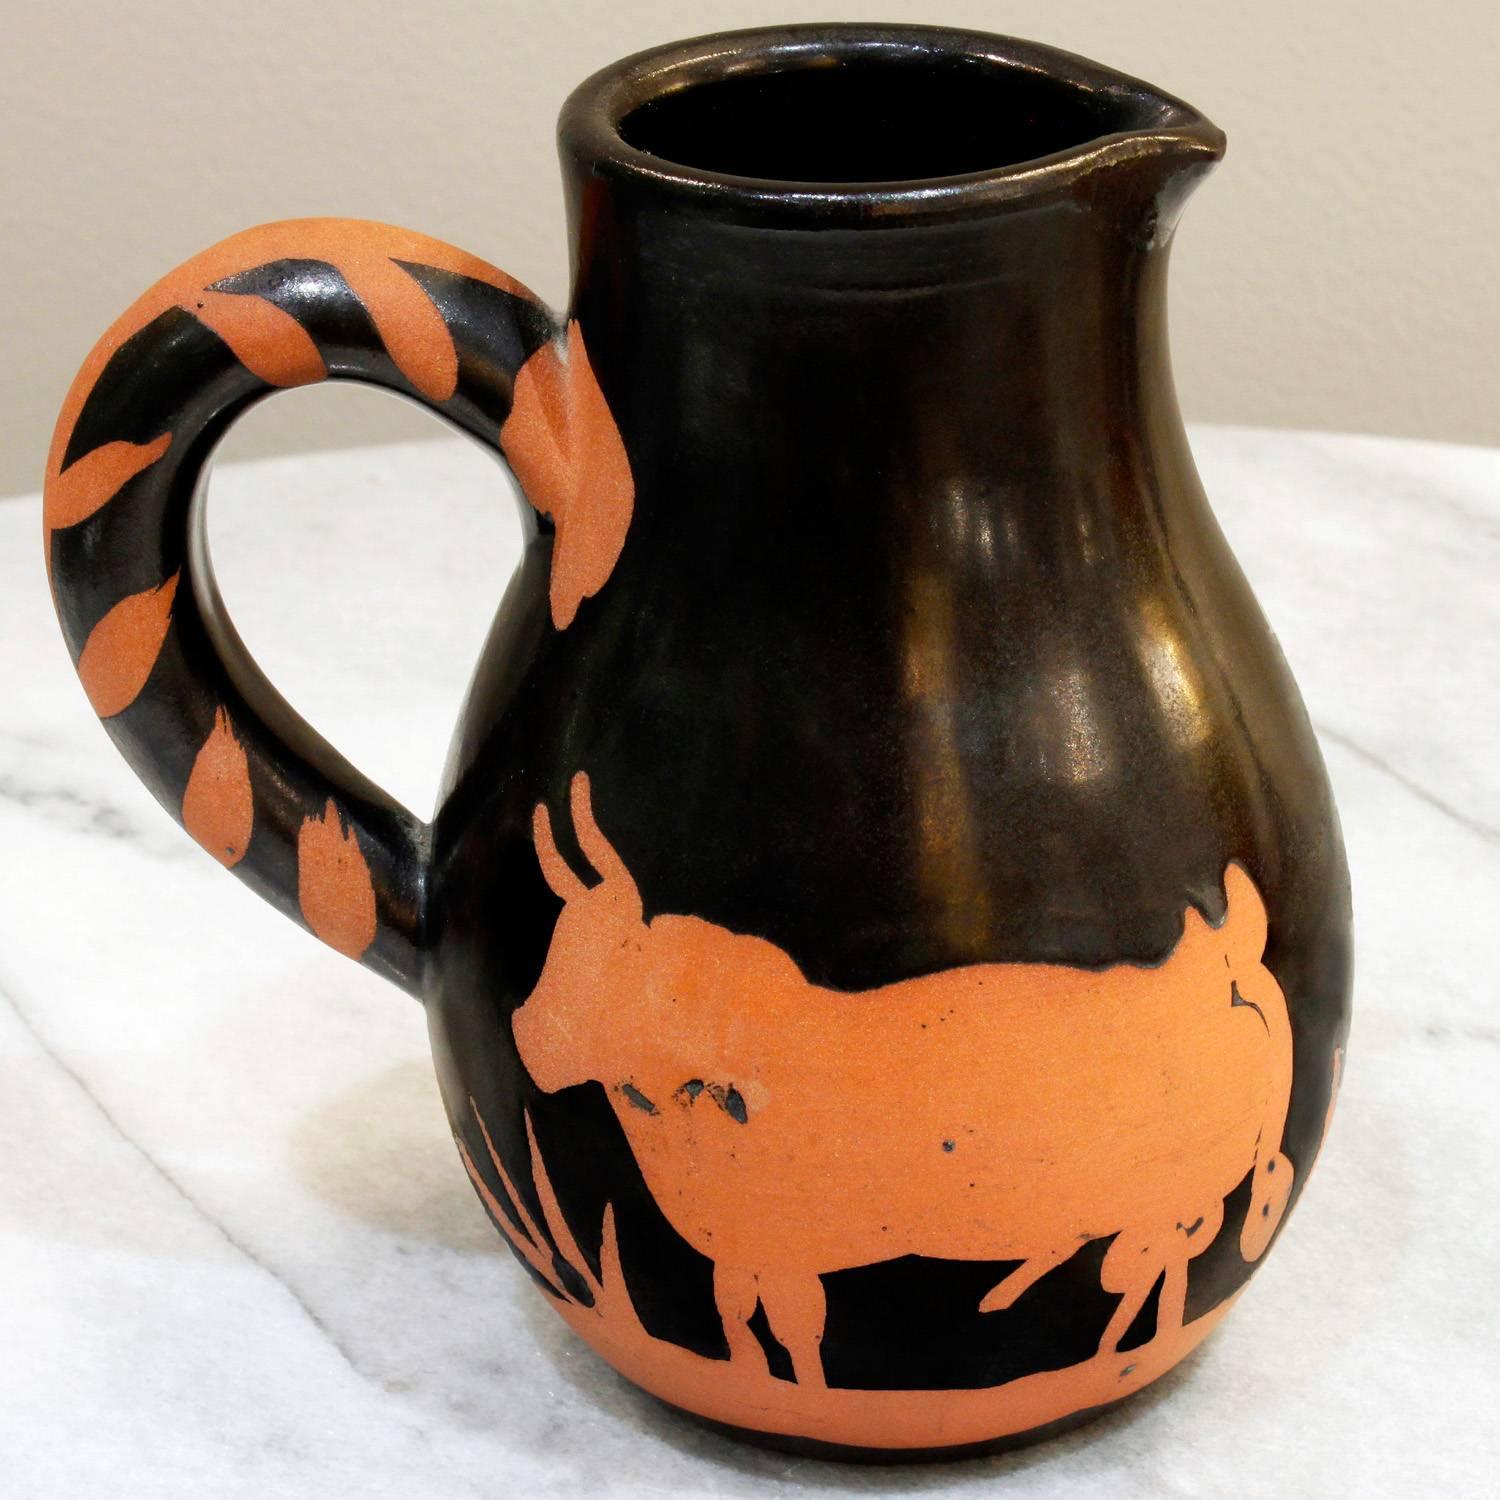 Hand-thrown partially glazed terracotta pitcher Picador (Alain Ramie 162) marked 'Edition Picasso/Madoura' on bottom, France 1952 (edition of 500).